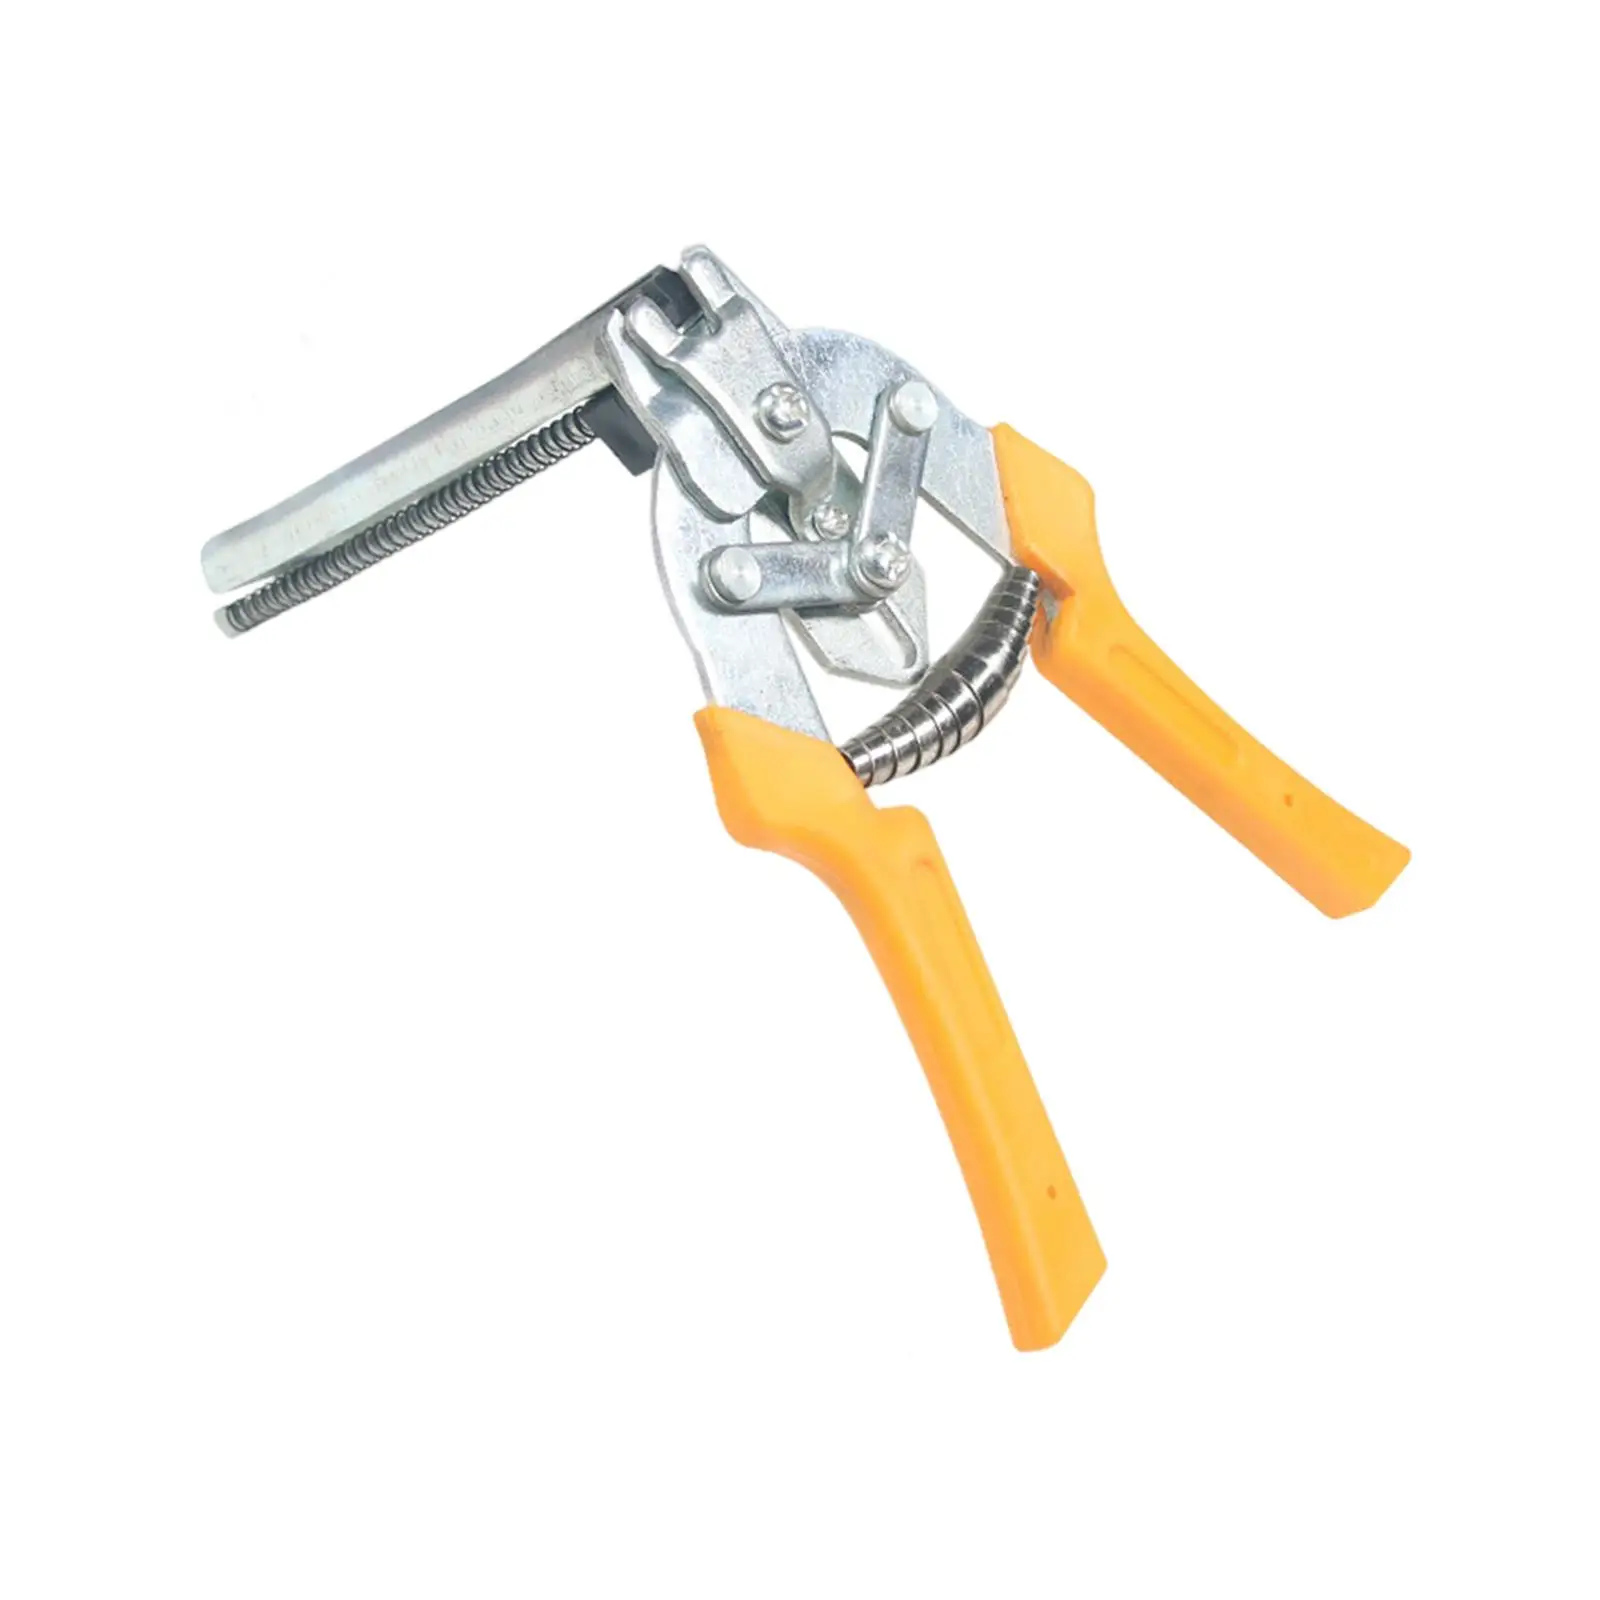 Nail Pliers Universal Clamp Professional Fencing Manual Plier for Chicken Installation Animal Cages Poultry Manual Tool